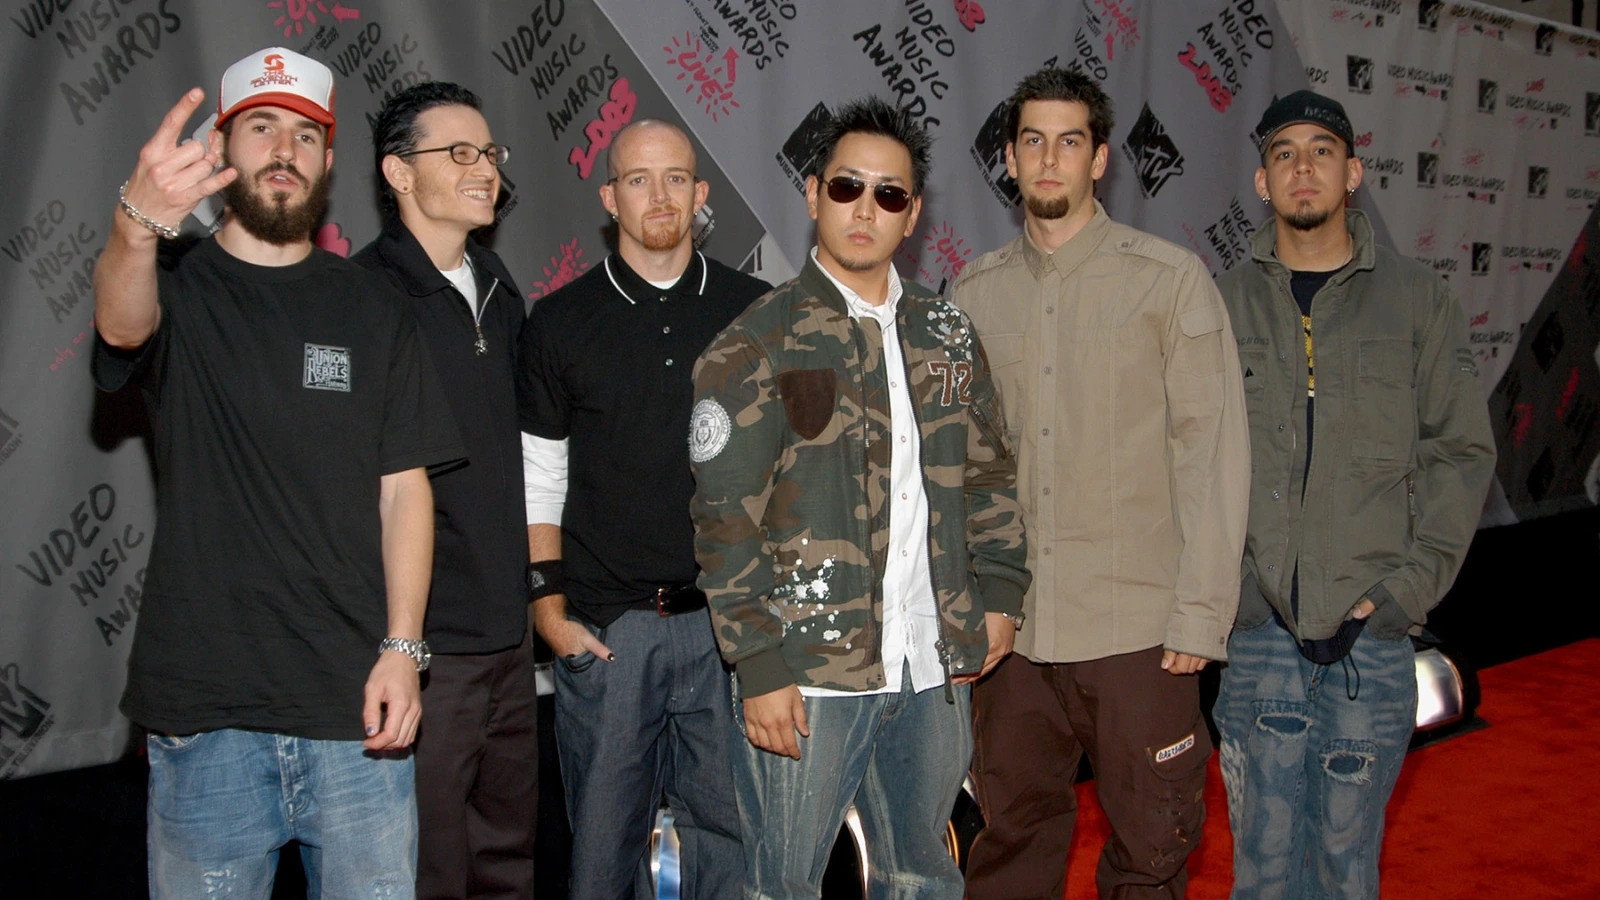 LINKIN PARK Shares Previously Unreleased Song 'Lost', Announces